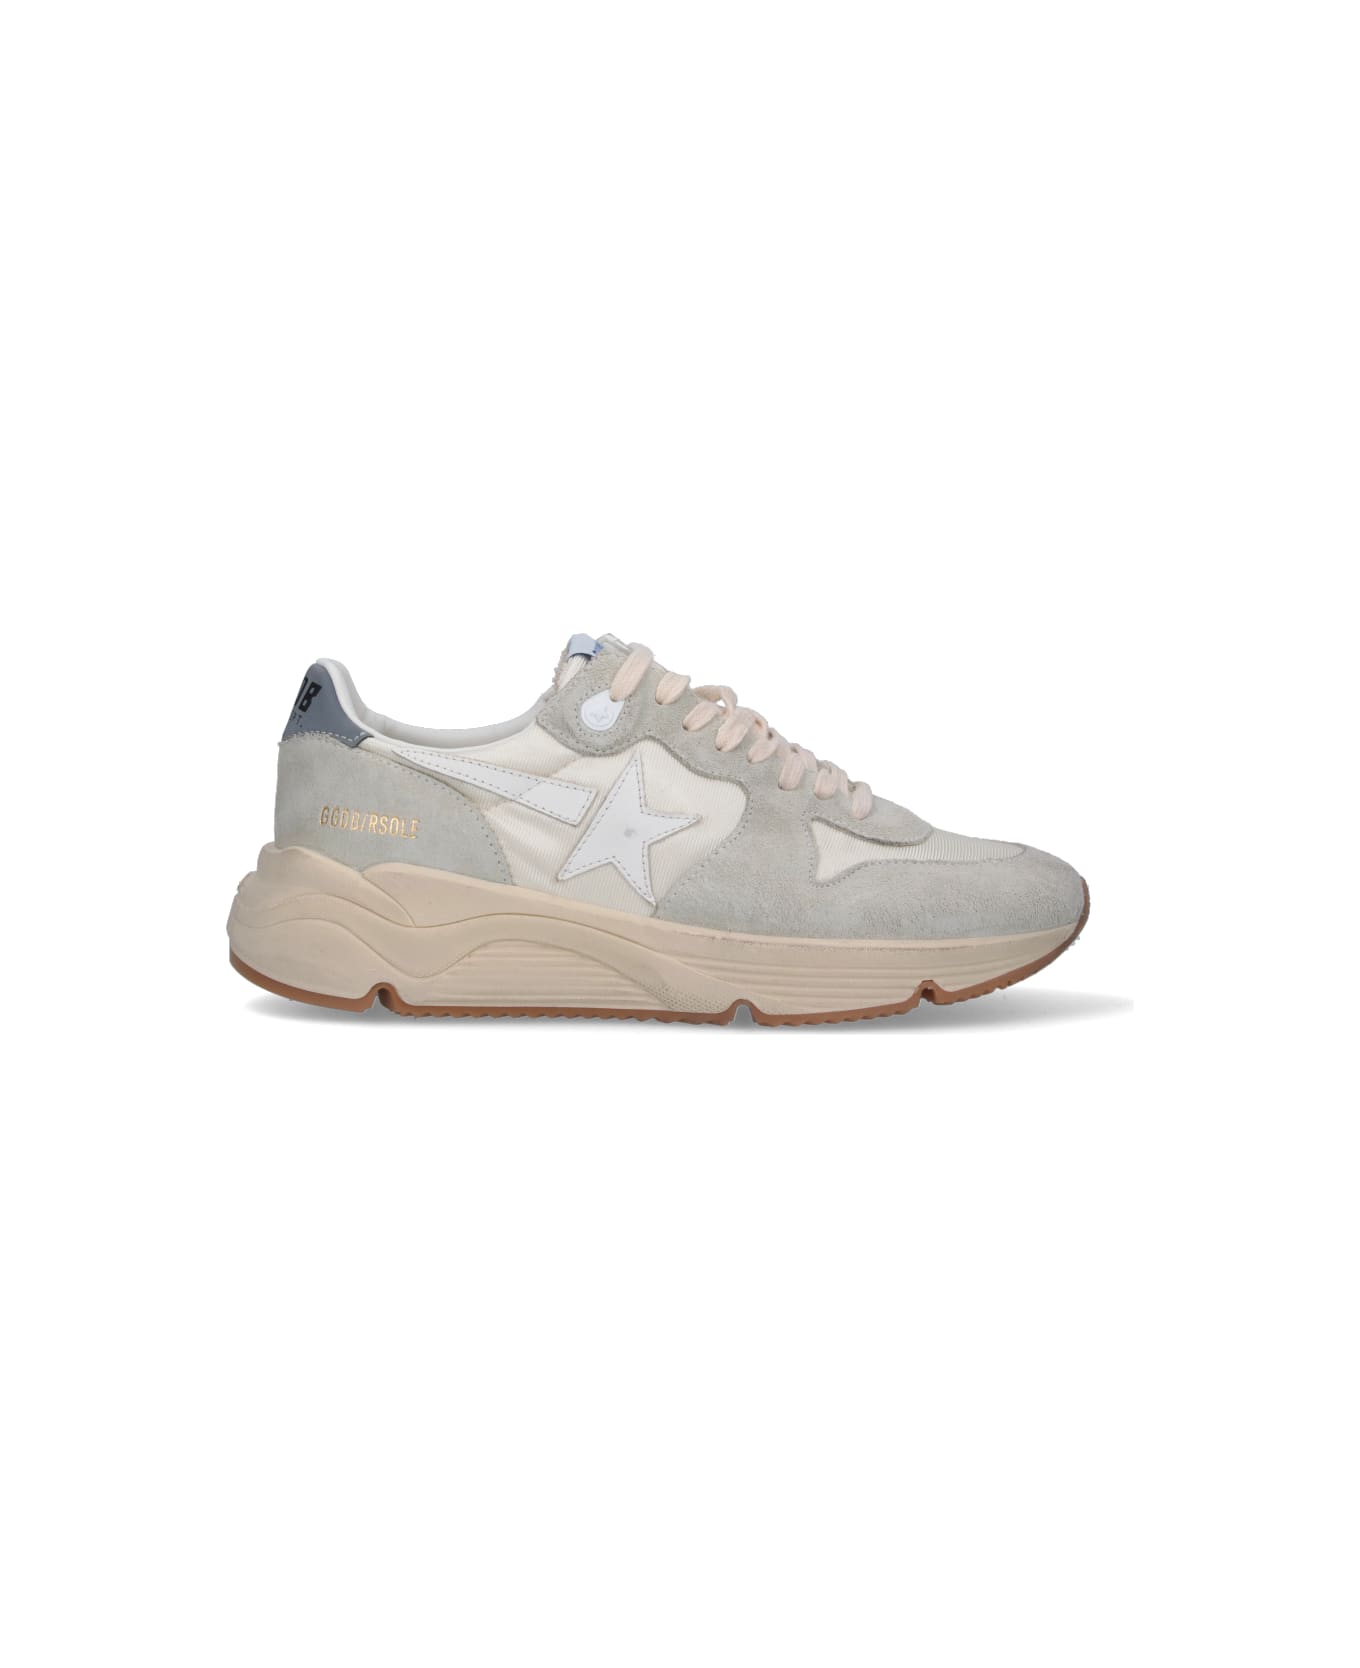 Golden Goose Running Sole Lace-up Sneakers - Cream スニーカー